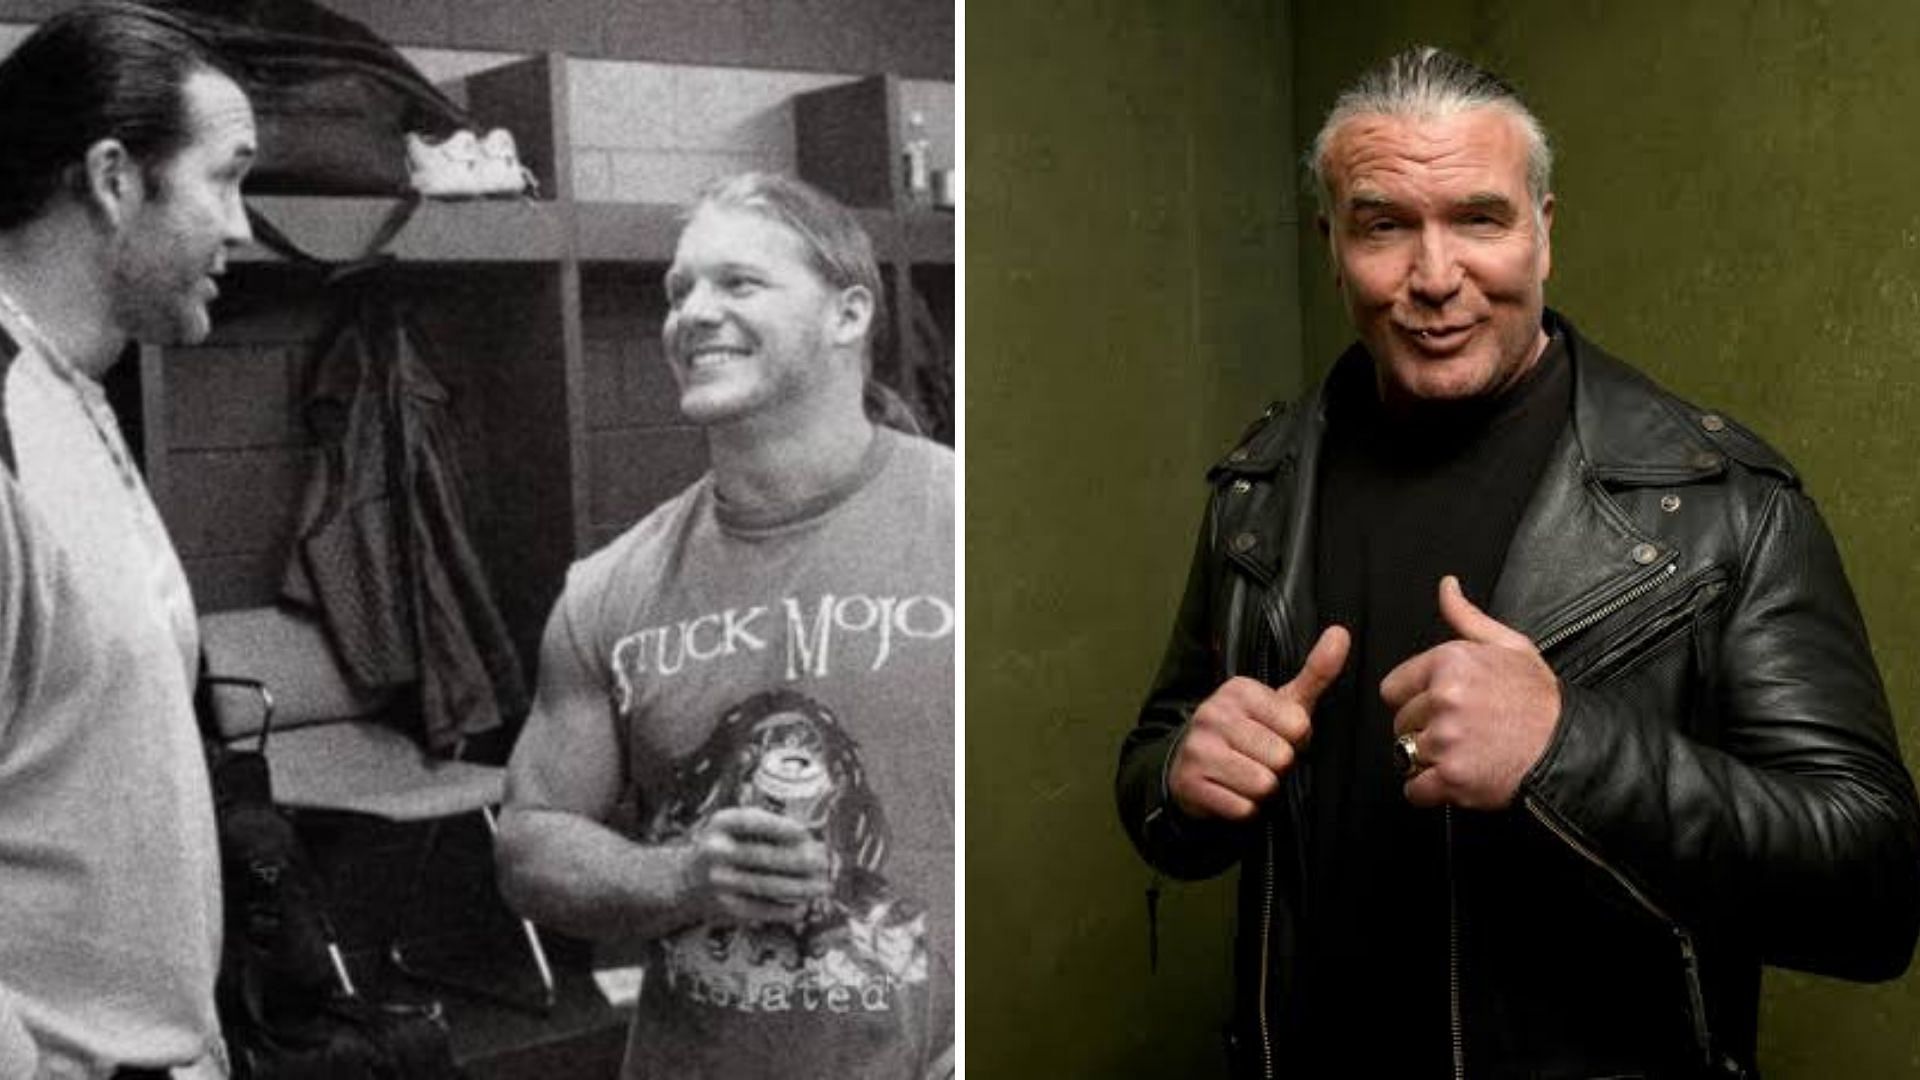 Le Champion worked closely with Scott Hall in WCW